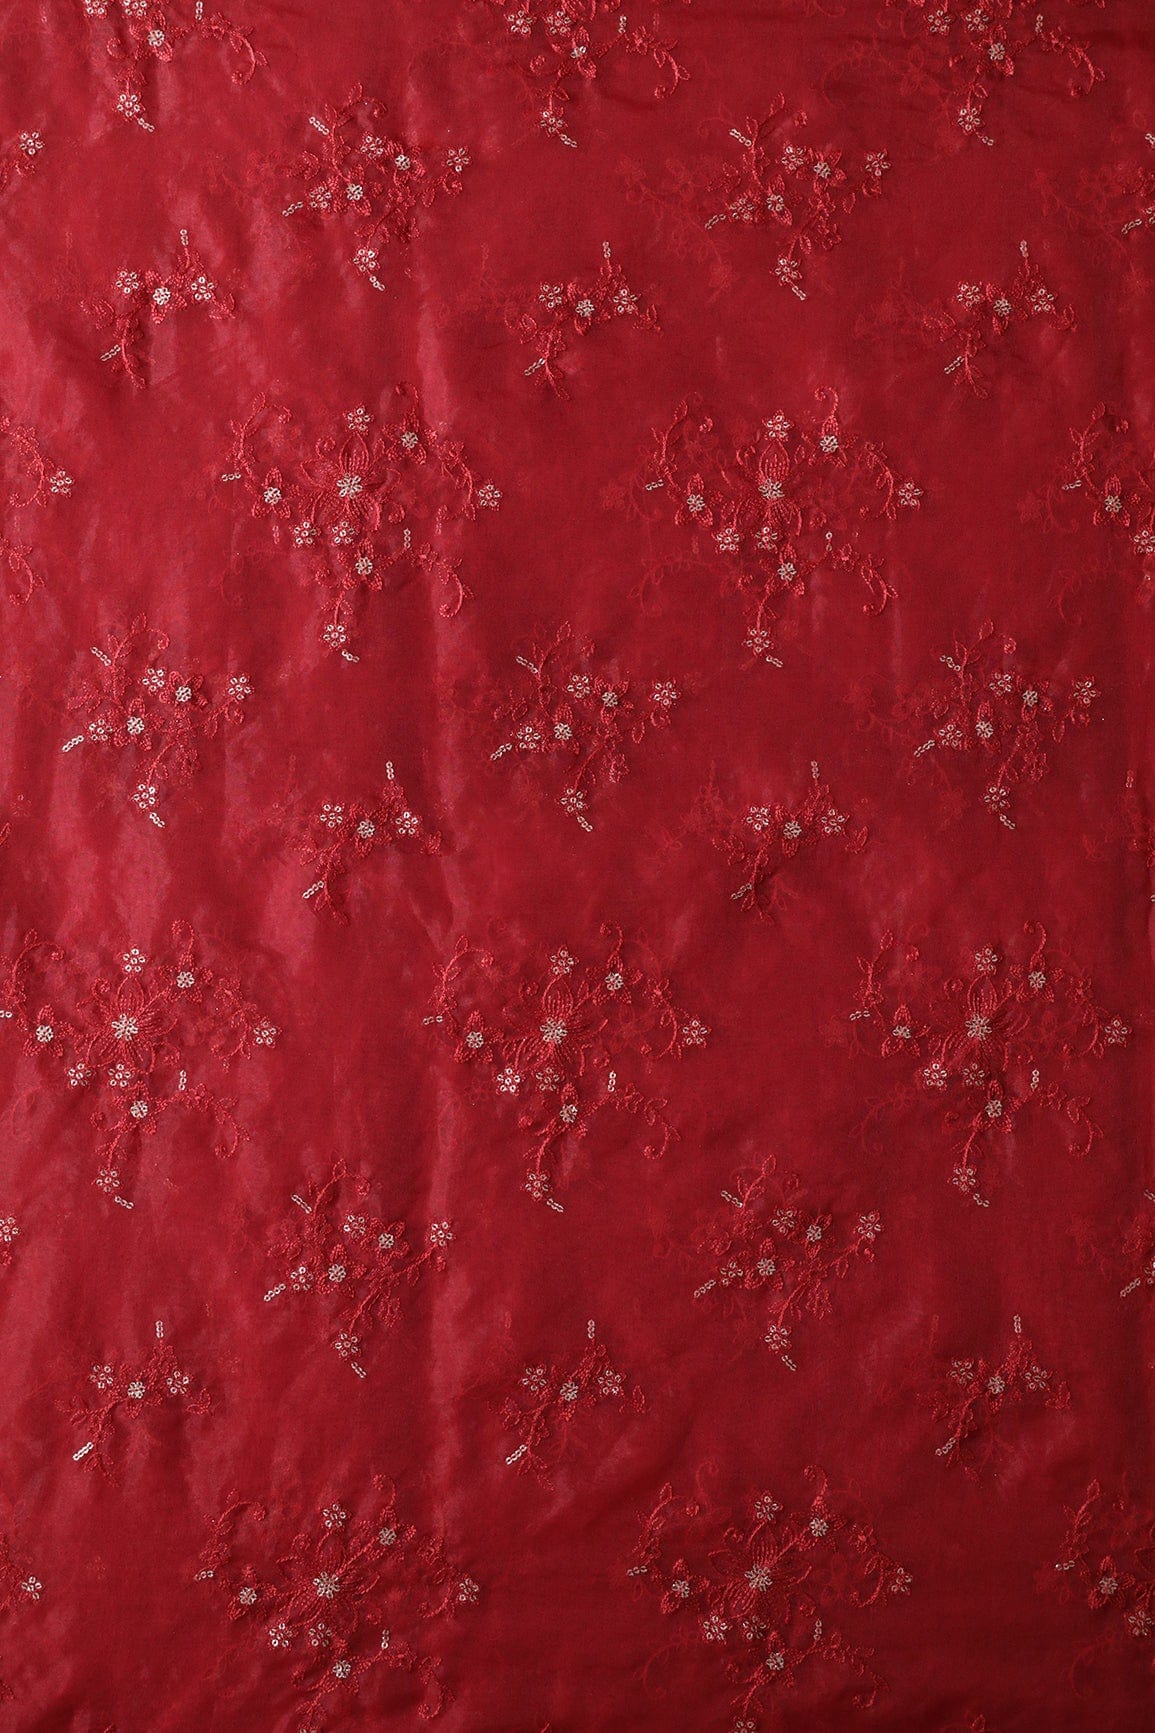 doeraa Embroidery Fabrics Red Thread With Gold Sequins Embroidery Work On Red Organza Fabric